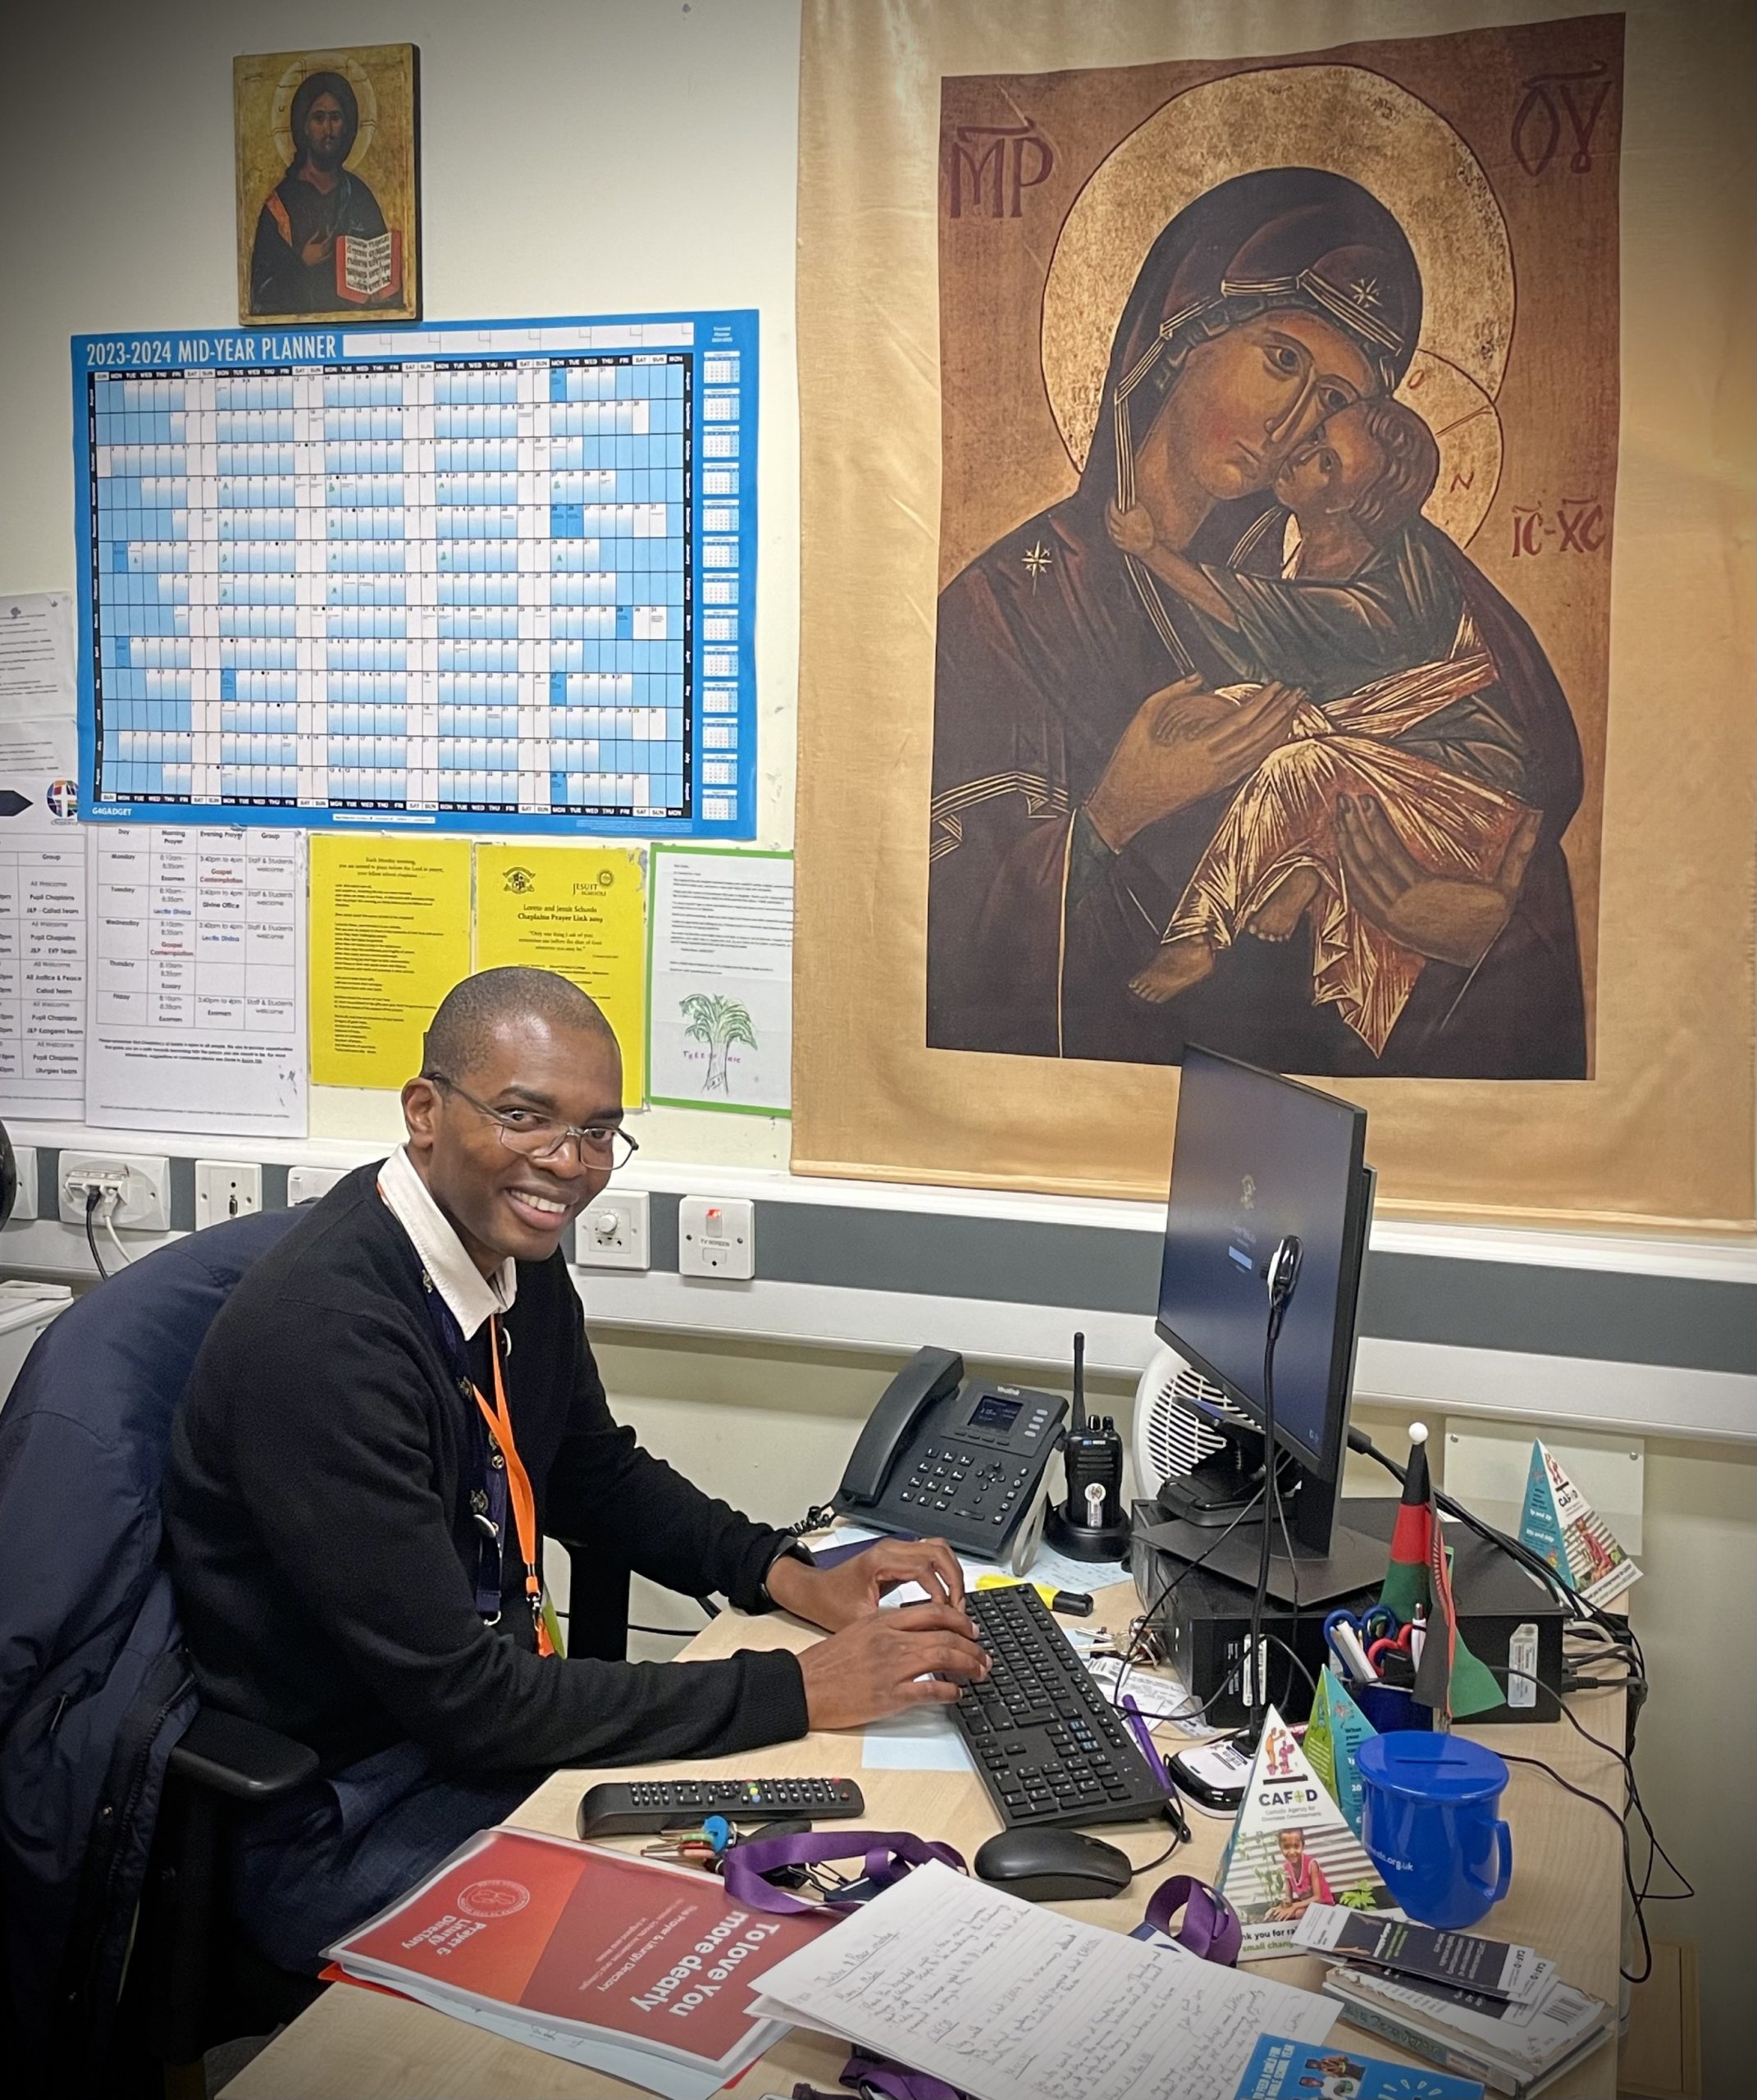 Deacon Davie sits at his desk in front of his computer, smiling at the camera. In the background, the is a large poster depicting Our Lady holding the infant Jesus